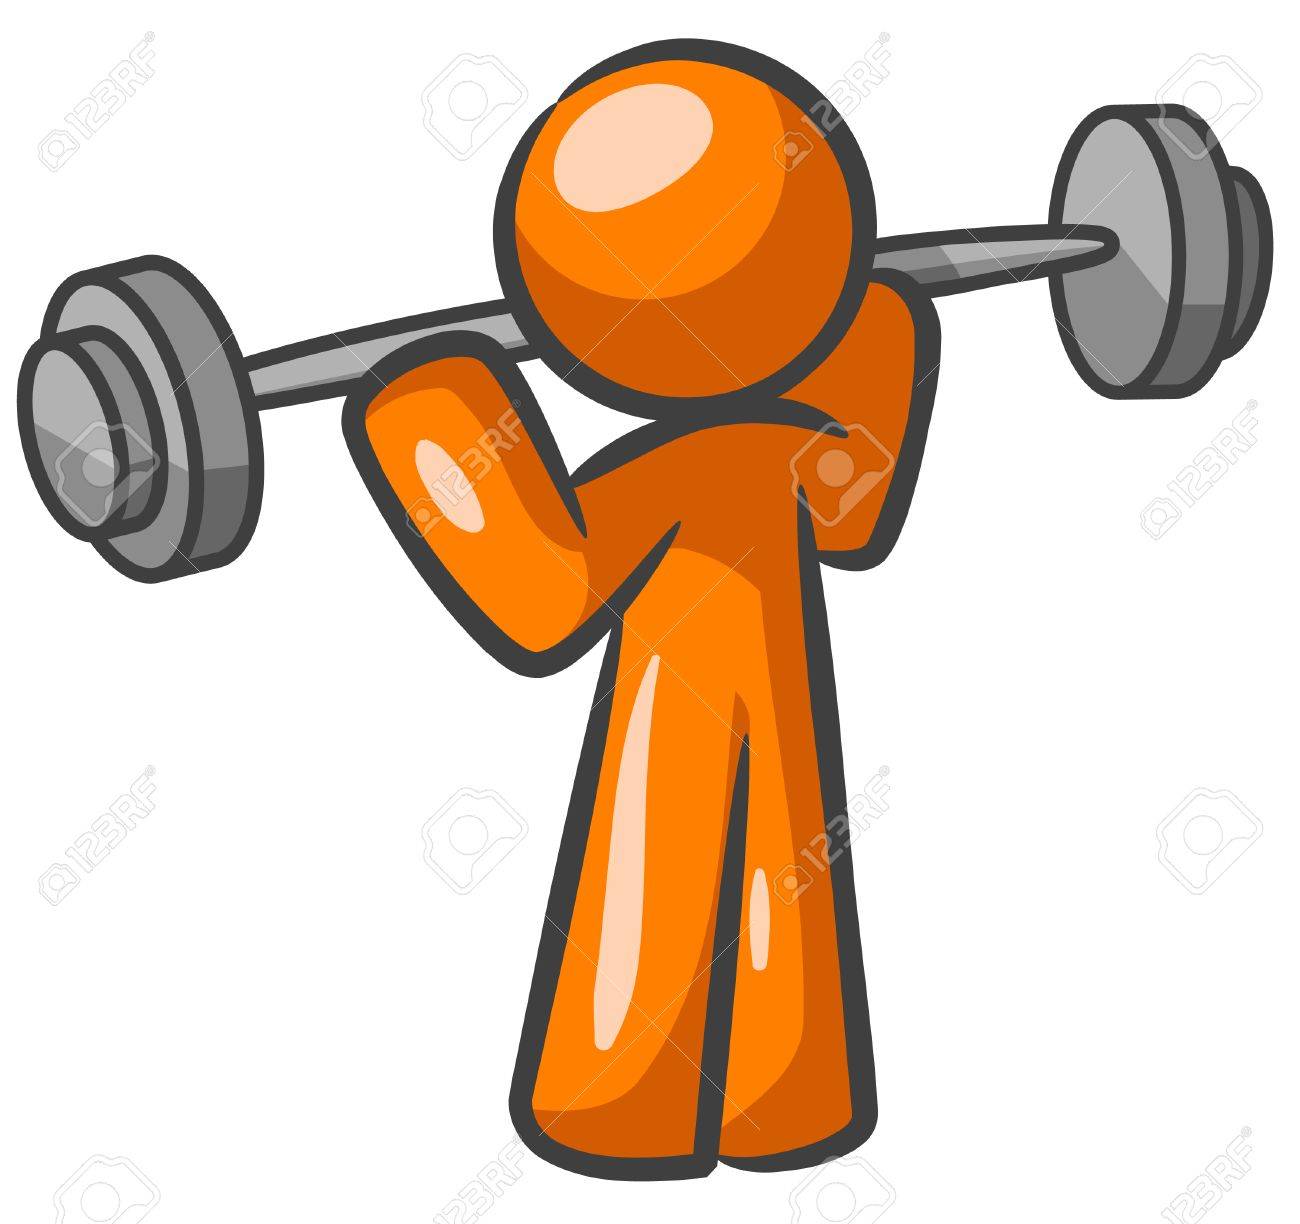 Weightlifting Cliparts | Free download best Weightlifting ...